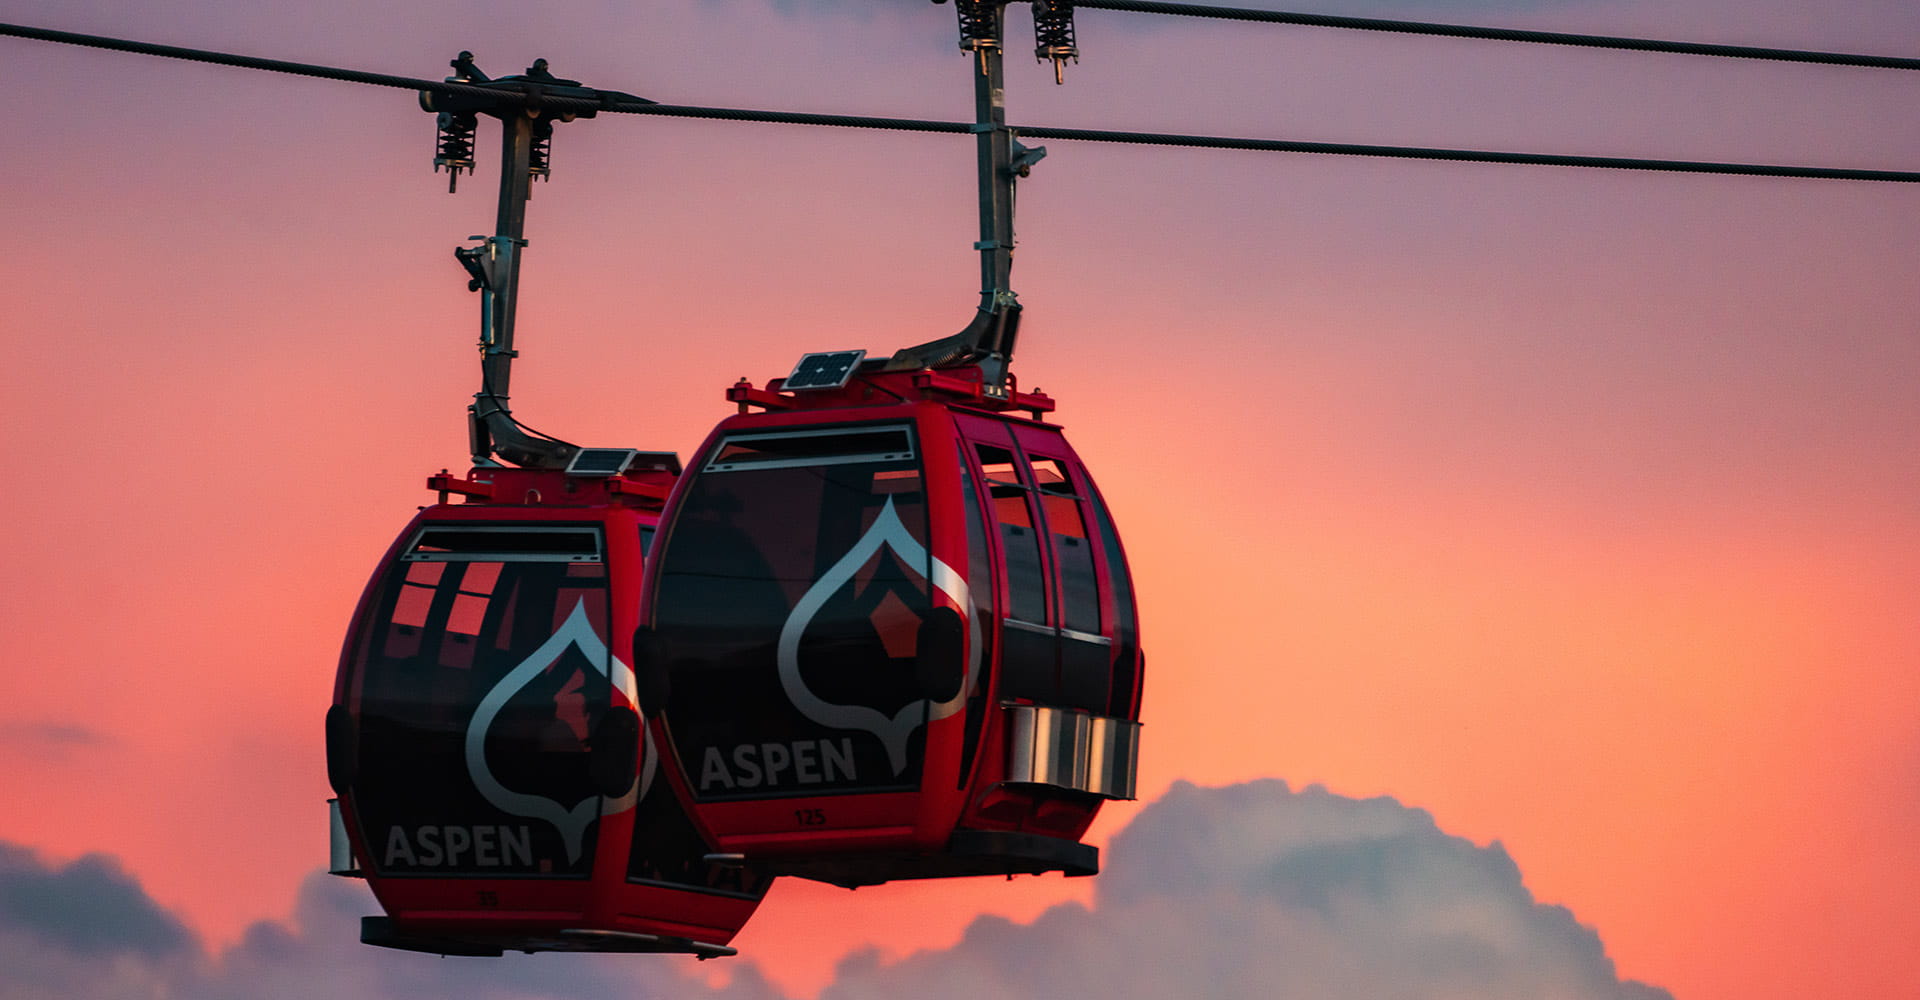 Two Silver Queen Gondolas at sunset